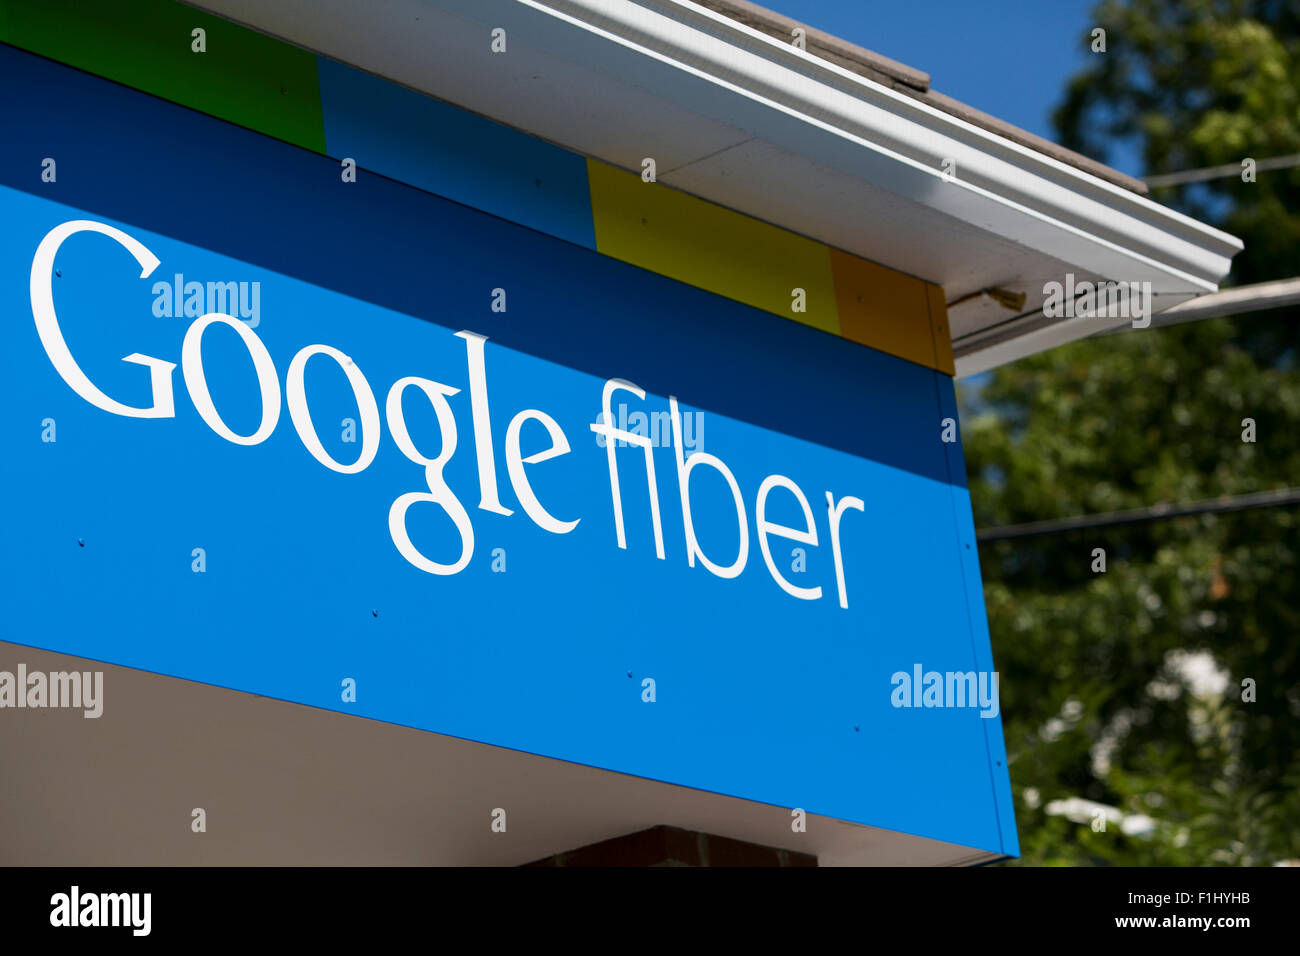 A logo sign outside of a Google Fiber sales office in Kansas City, Missouri on August 23, 2015. Stock Photo